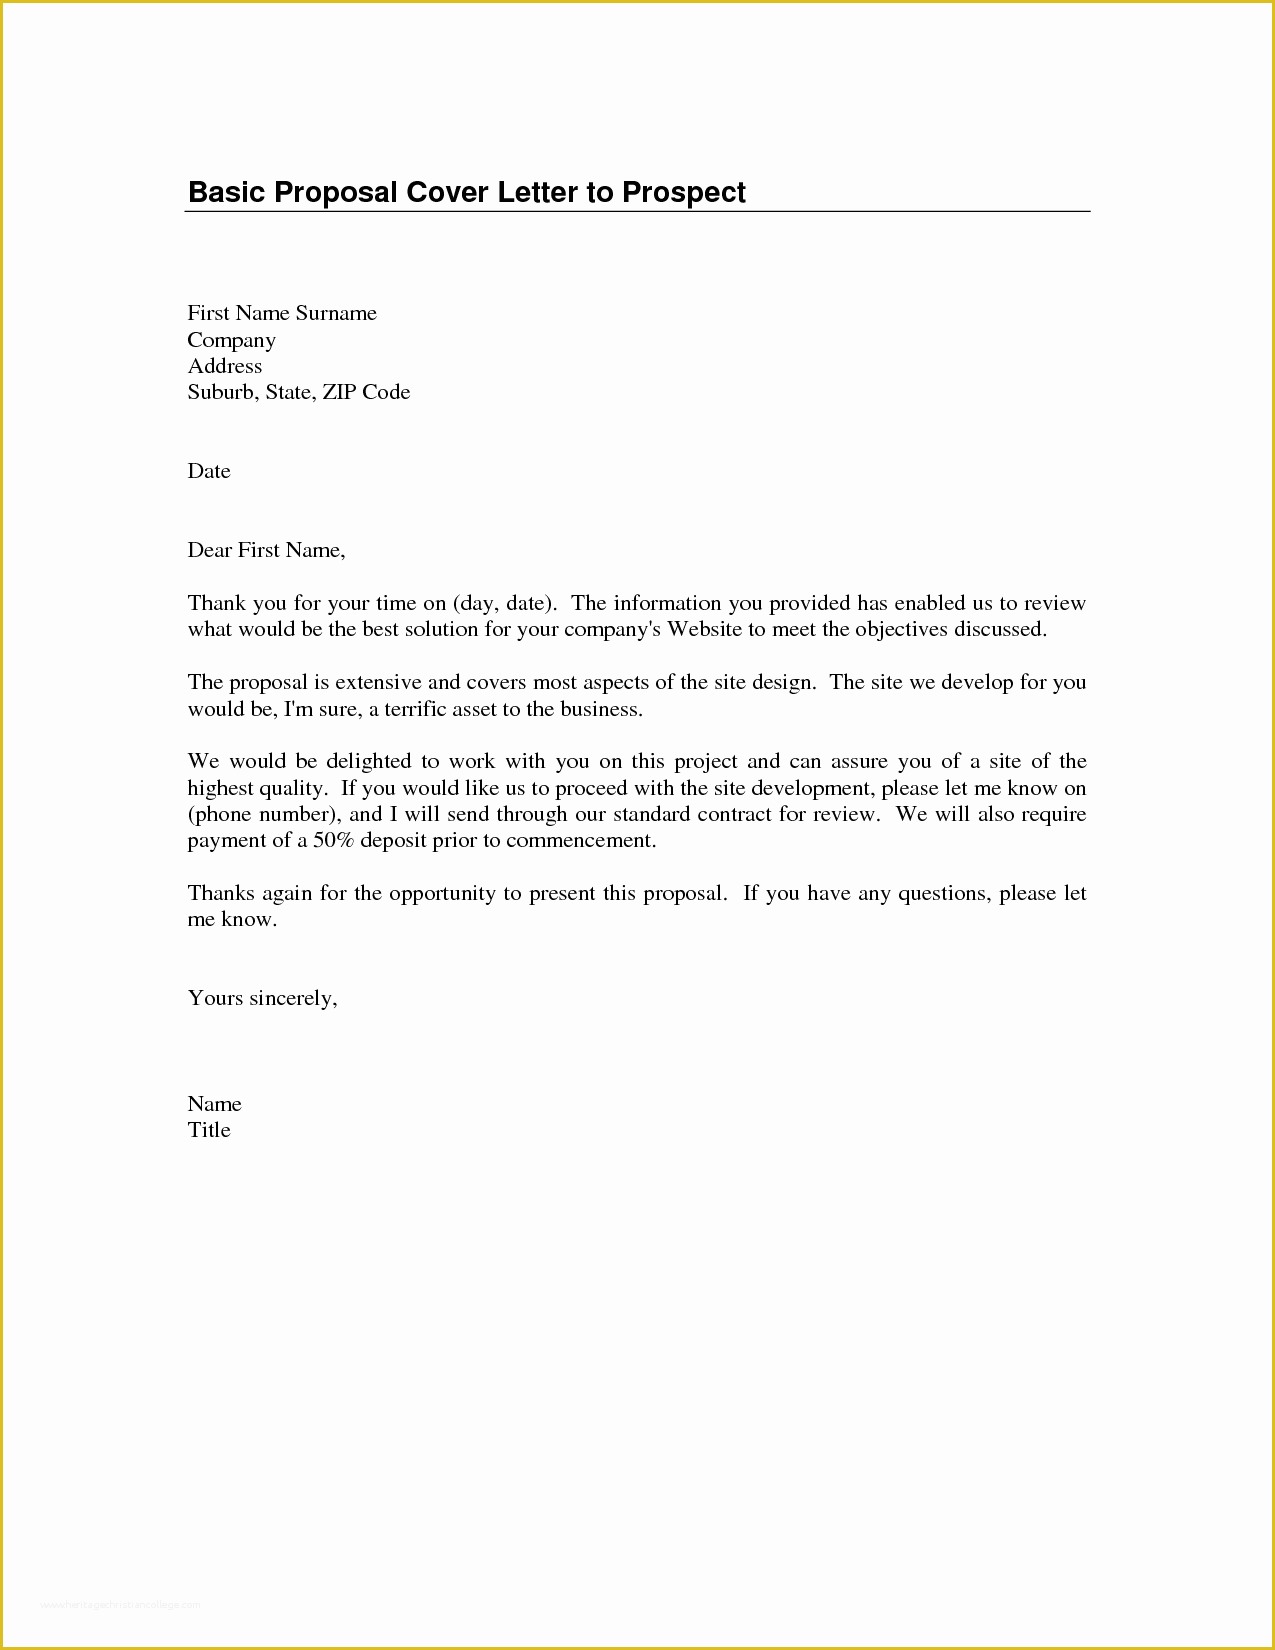 Free Cover Letter Template Of Basic Cover Letter Sample Basic Cover Letters Free